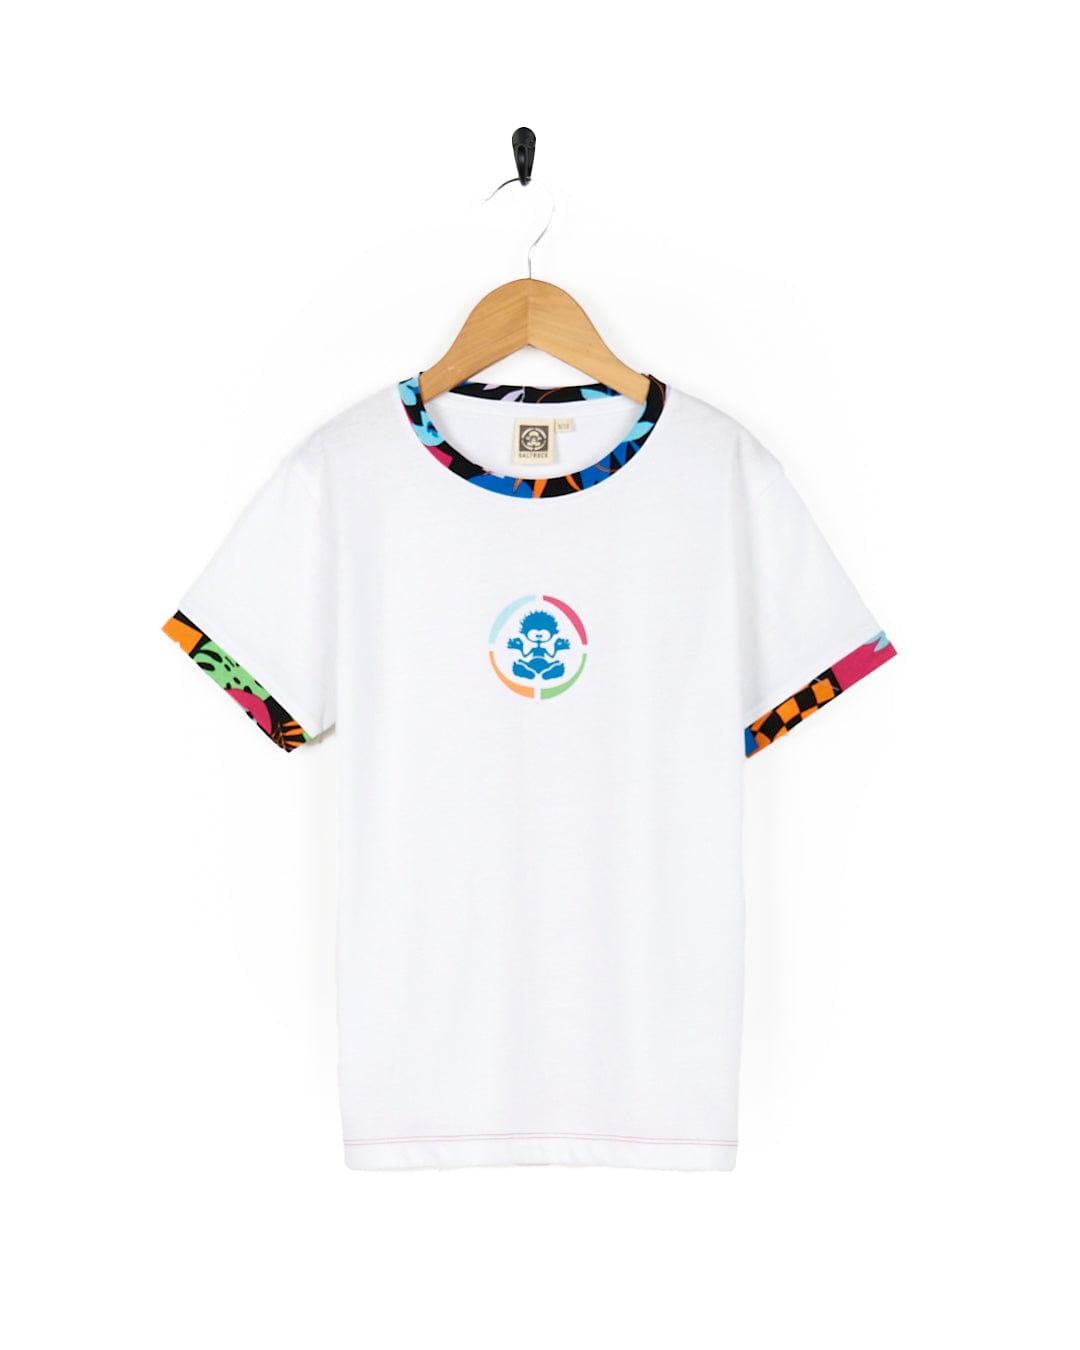 A Zephyr Tok - Kids Ringer Tee - White with a colorful logo on it.